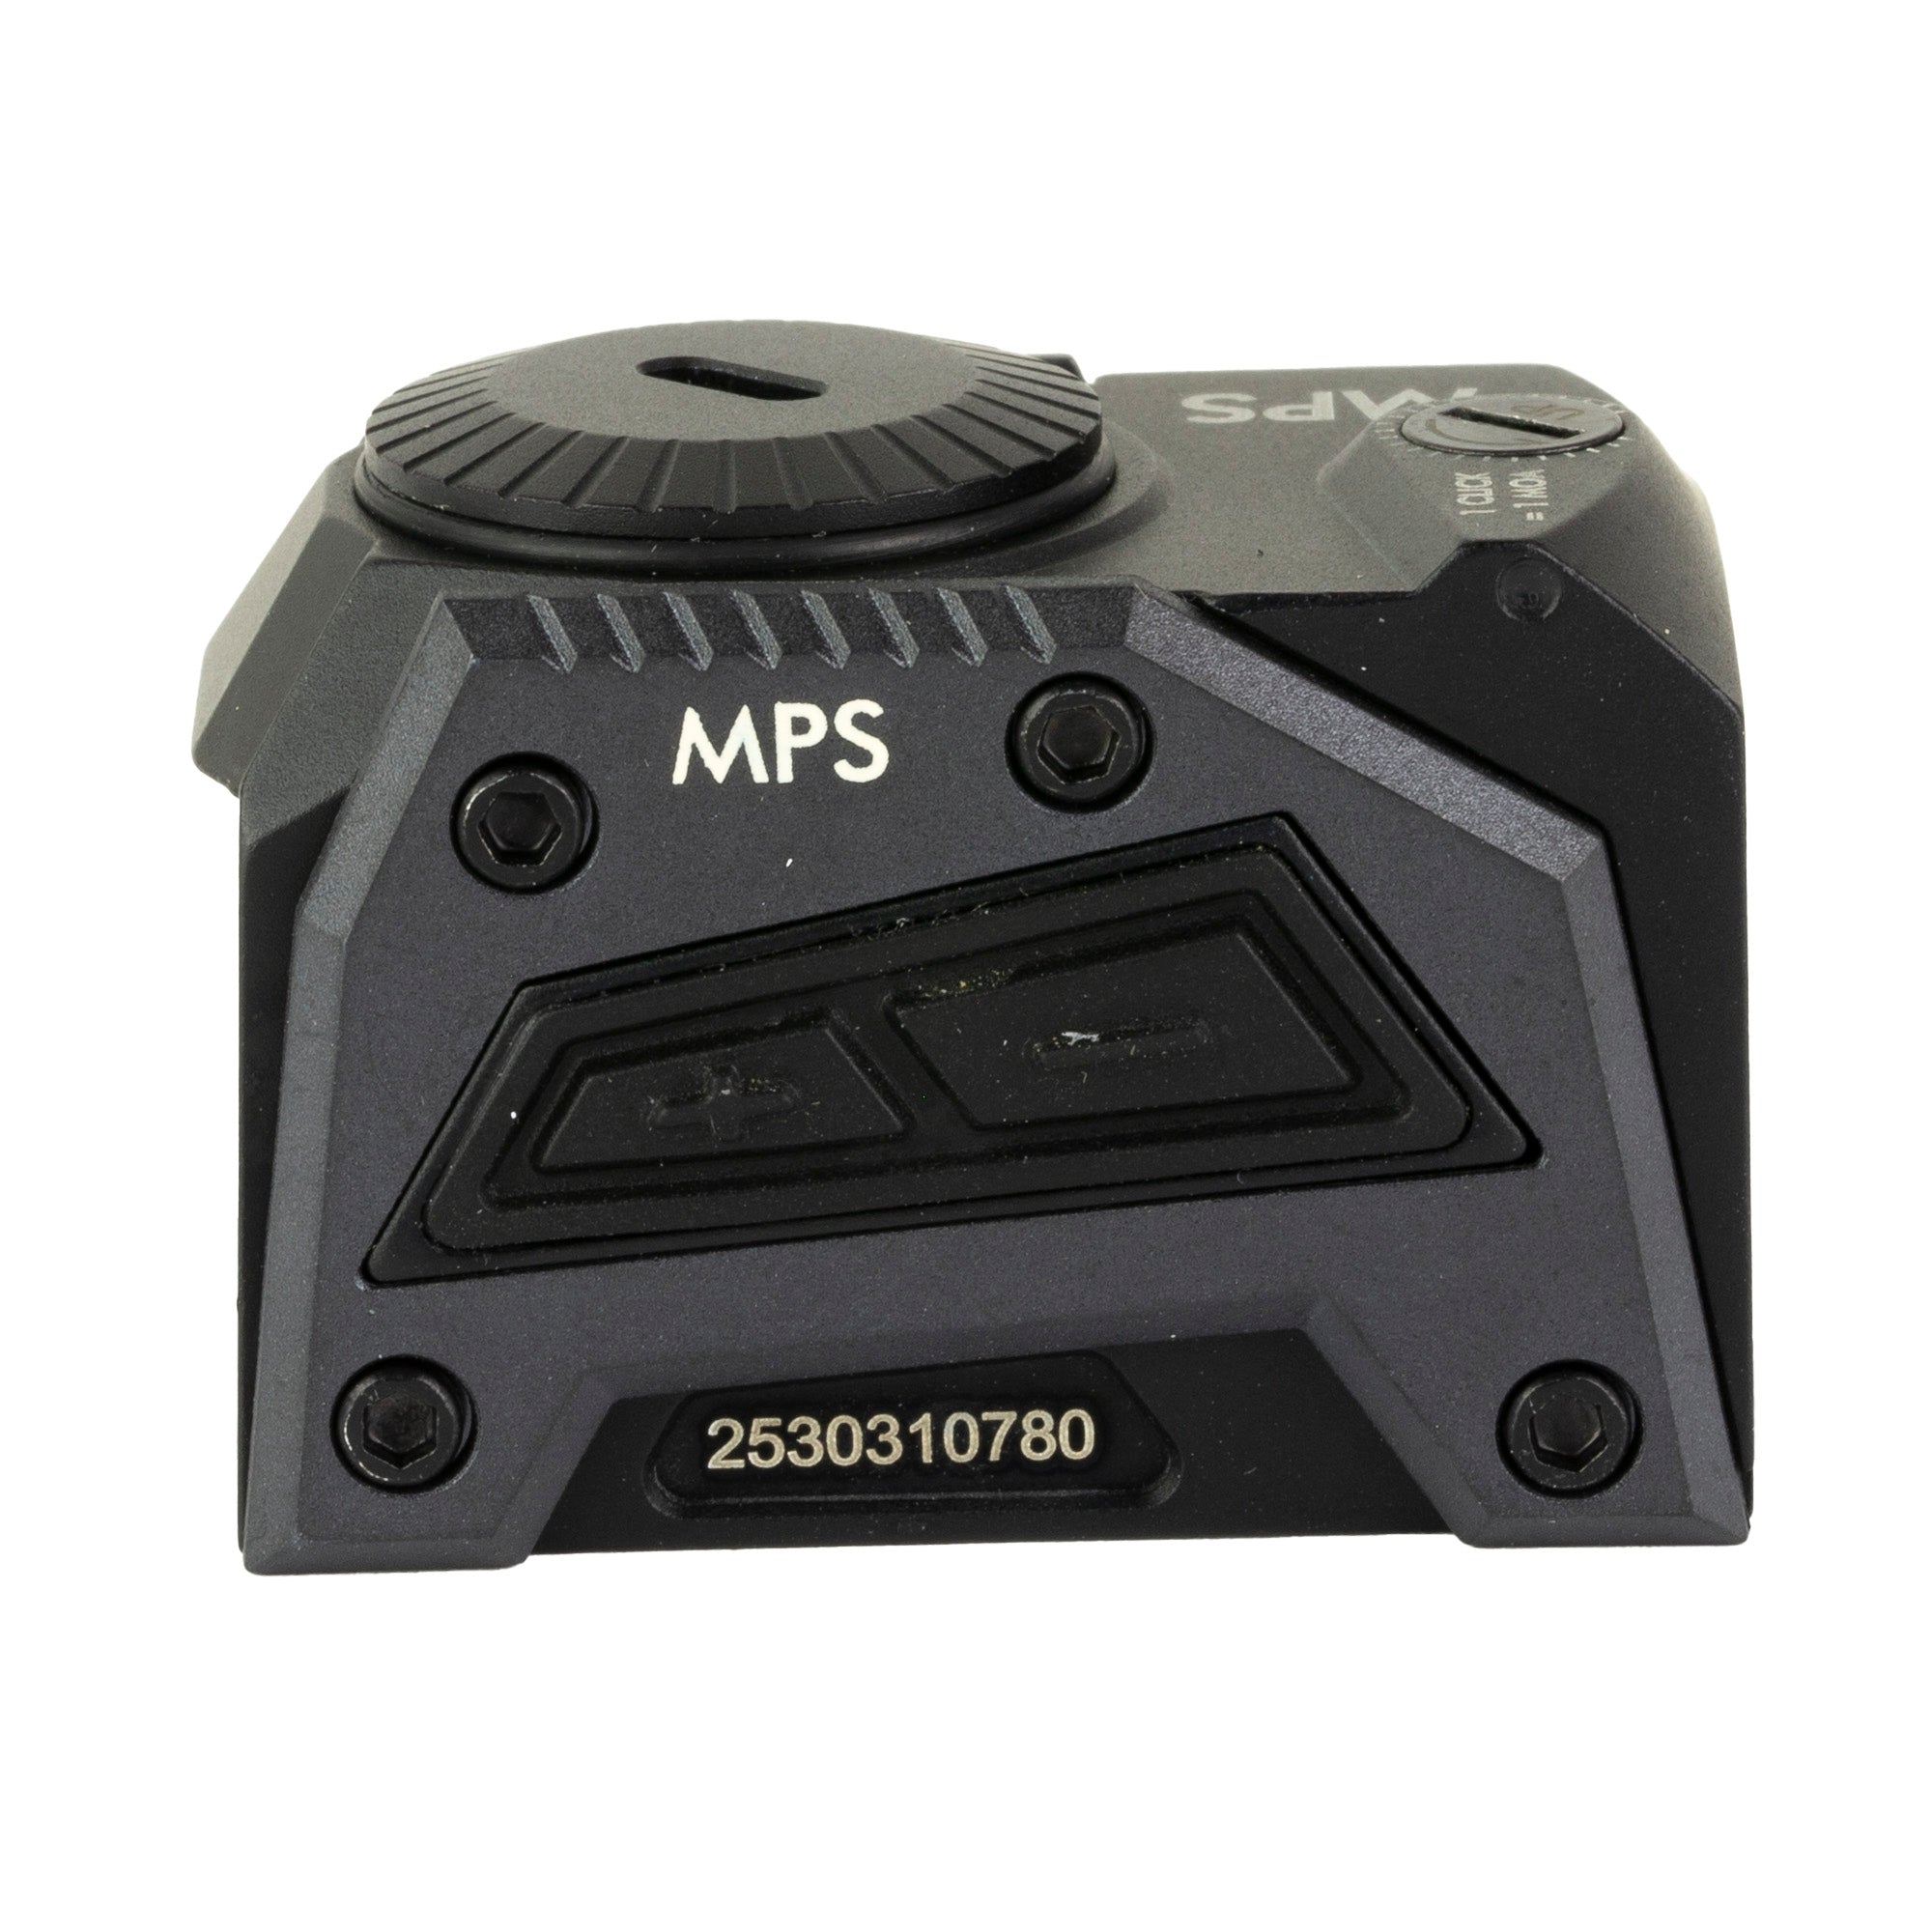 Steiner MPS 3 MOA Red Dot 3 MOA - ACRO Footprint